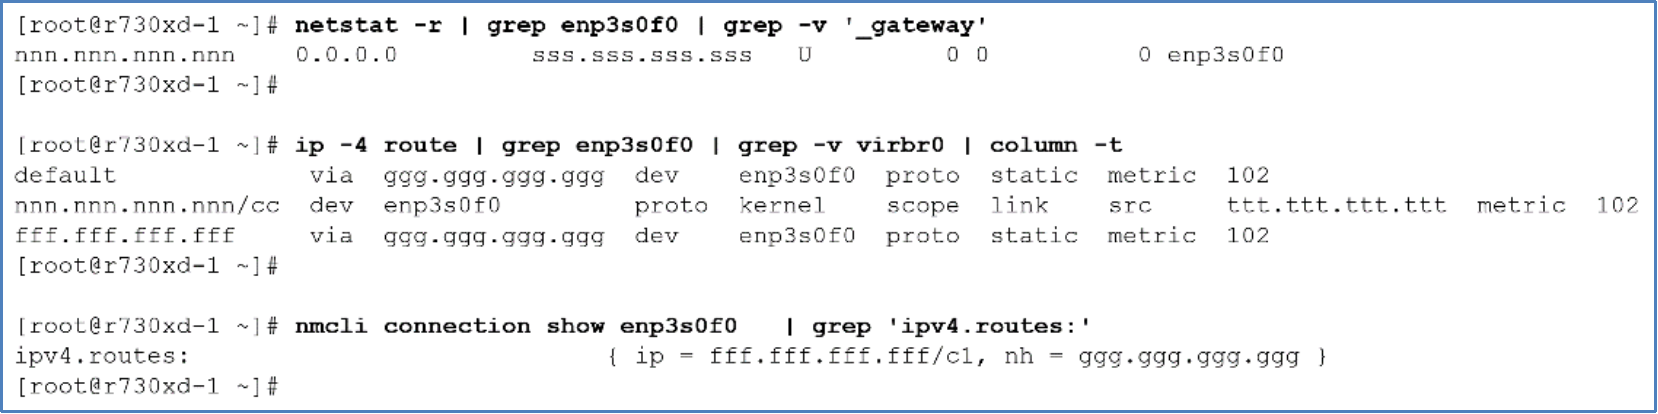 This diagram shows the output of LInux's "netstat -r", "ip -4 route", and nmcli connection show device" commands. The output shows that a static route is used for interface enp3s0f0.